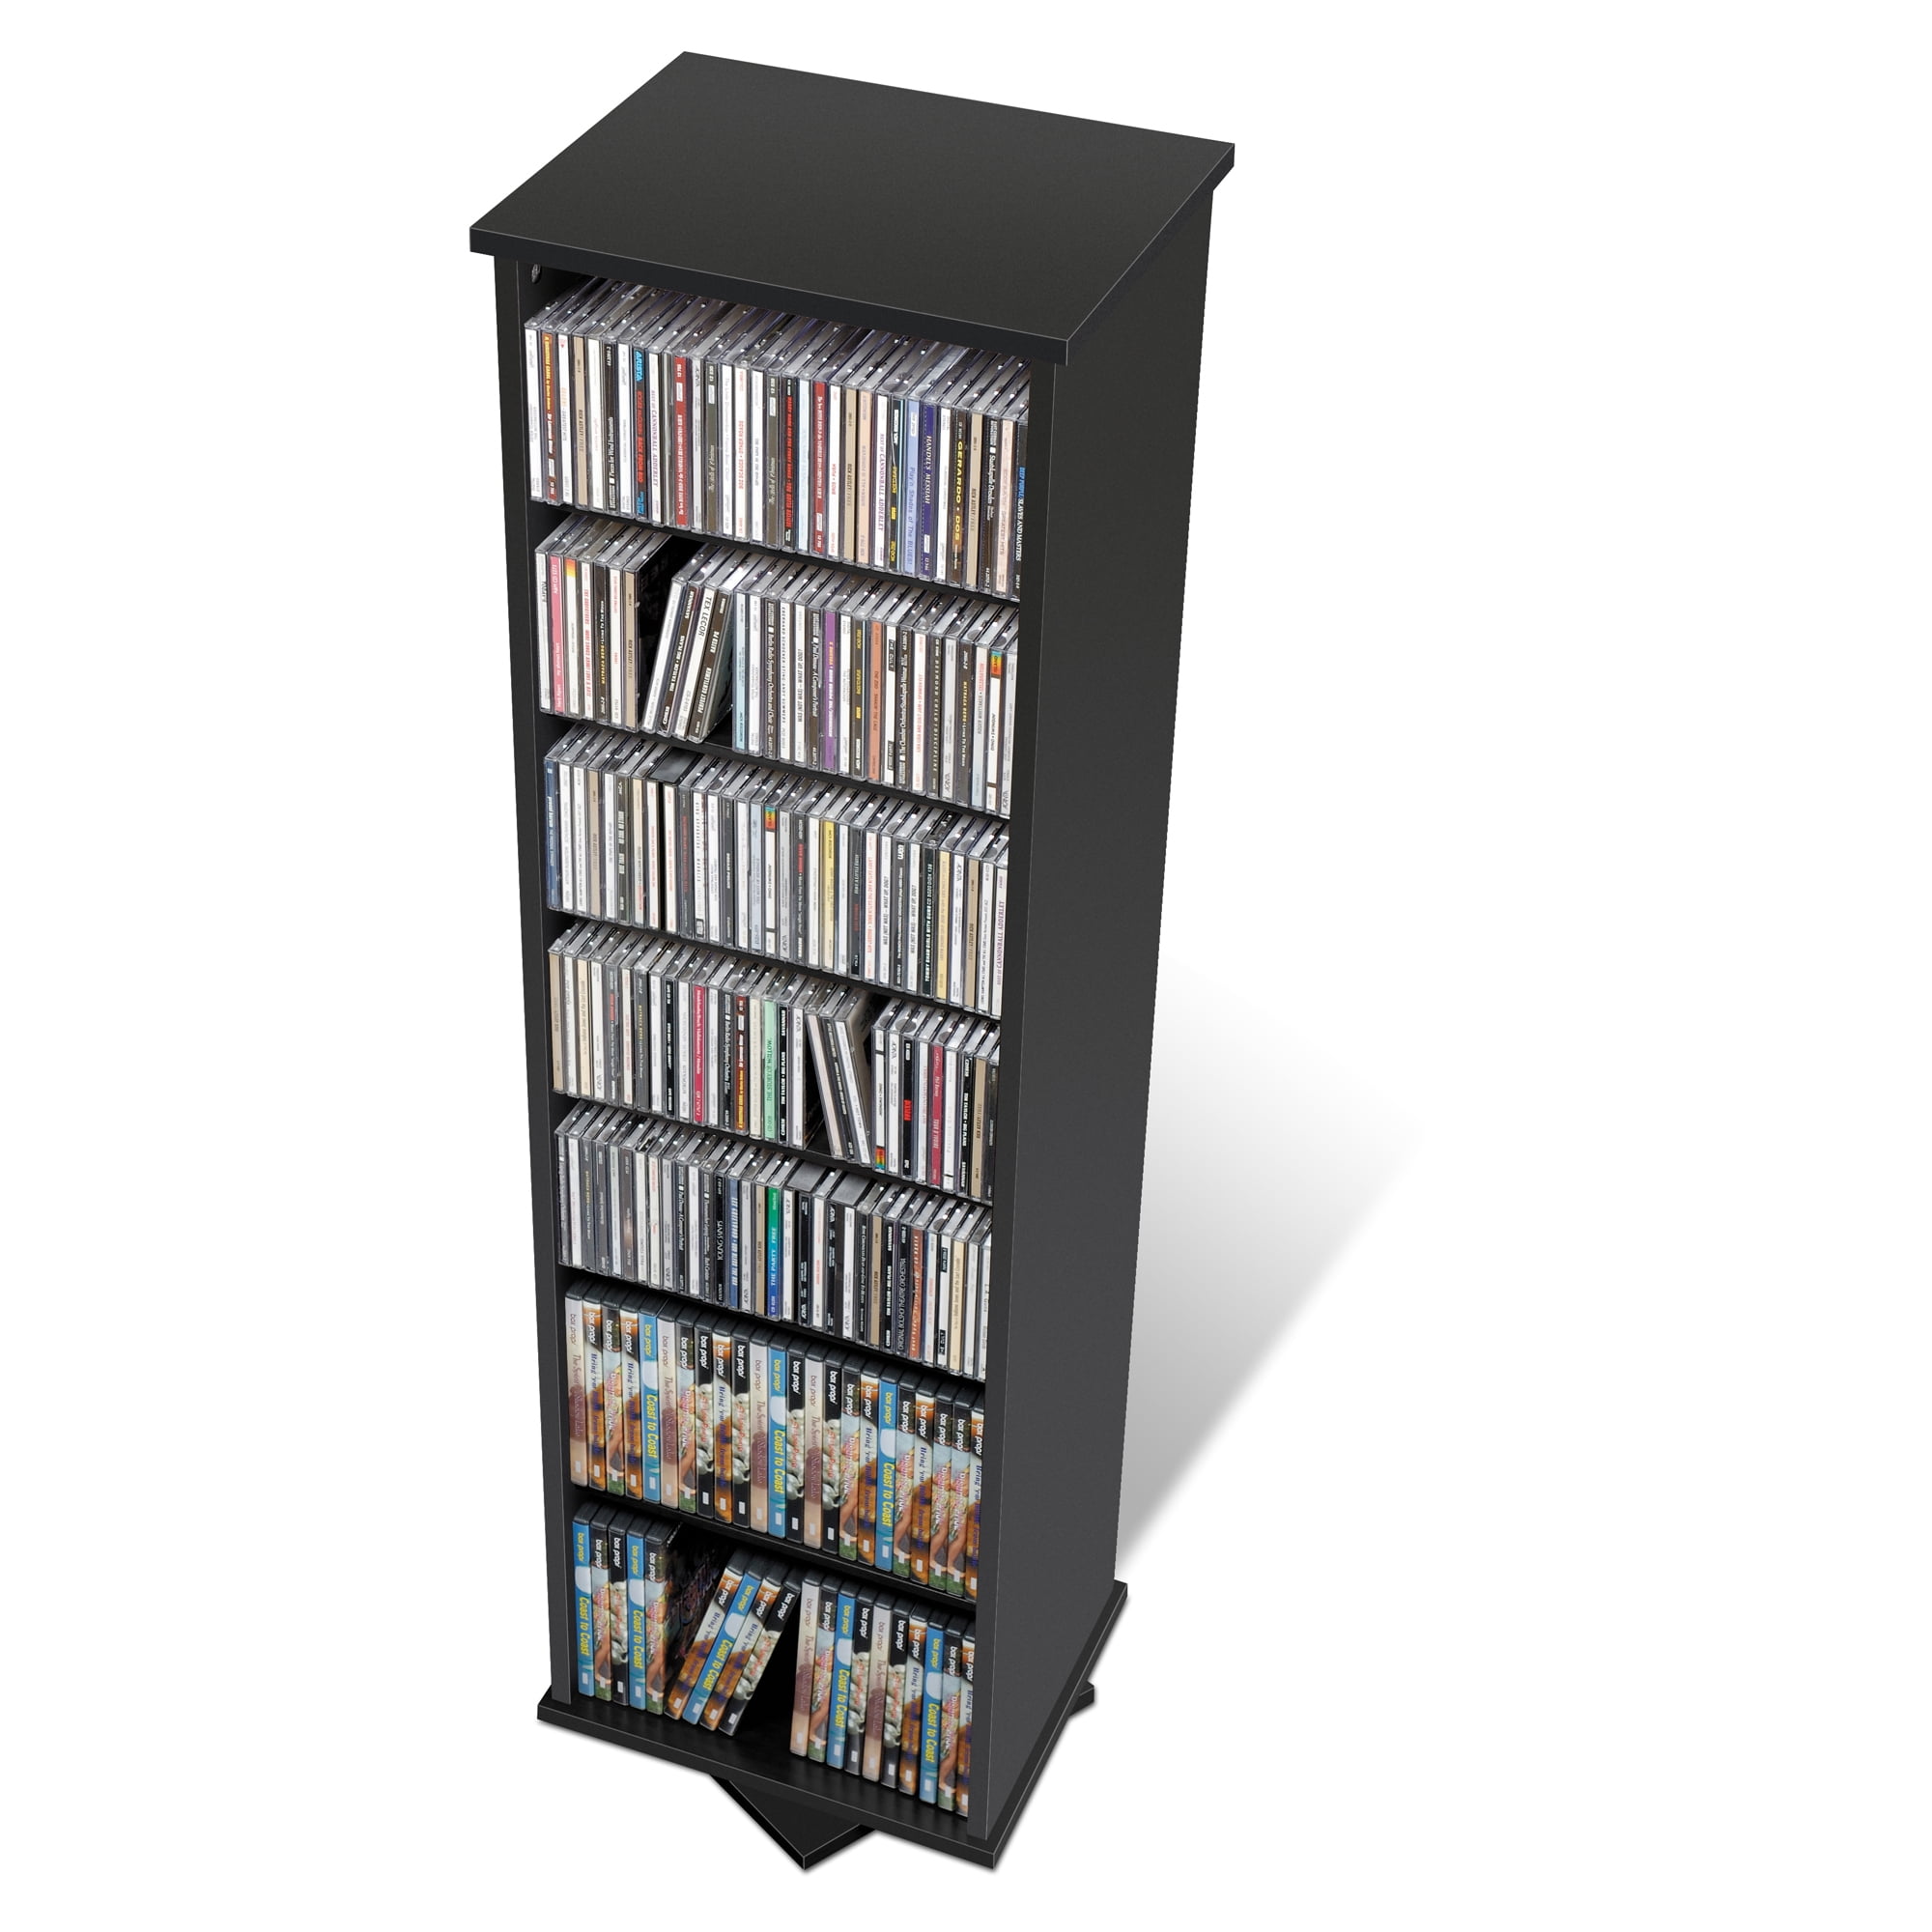 Atlantic Venus Media Storage Cabinet 4 Adjustable and 2 Fixed Shelves PN83035729 in Espresso Renewed Stylish Multimedia Storage Cabinet Holds 198 CDs 88 DVDs or 108 Blu-Rays